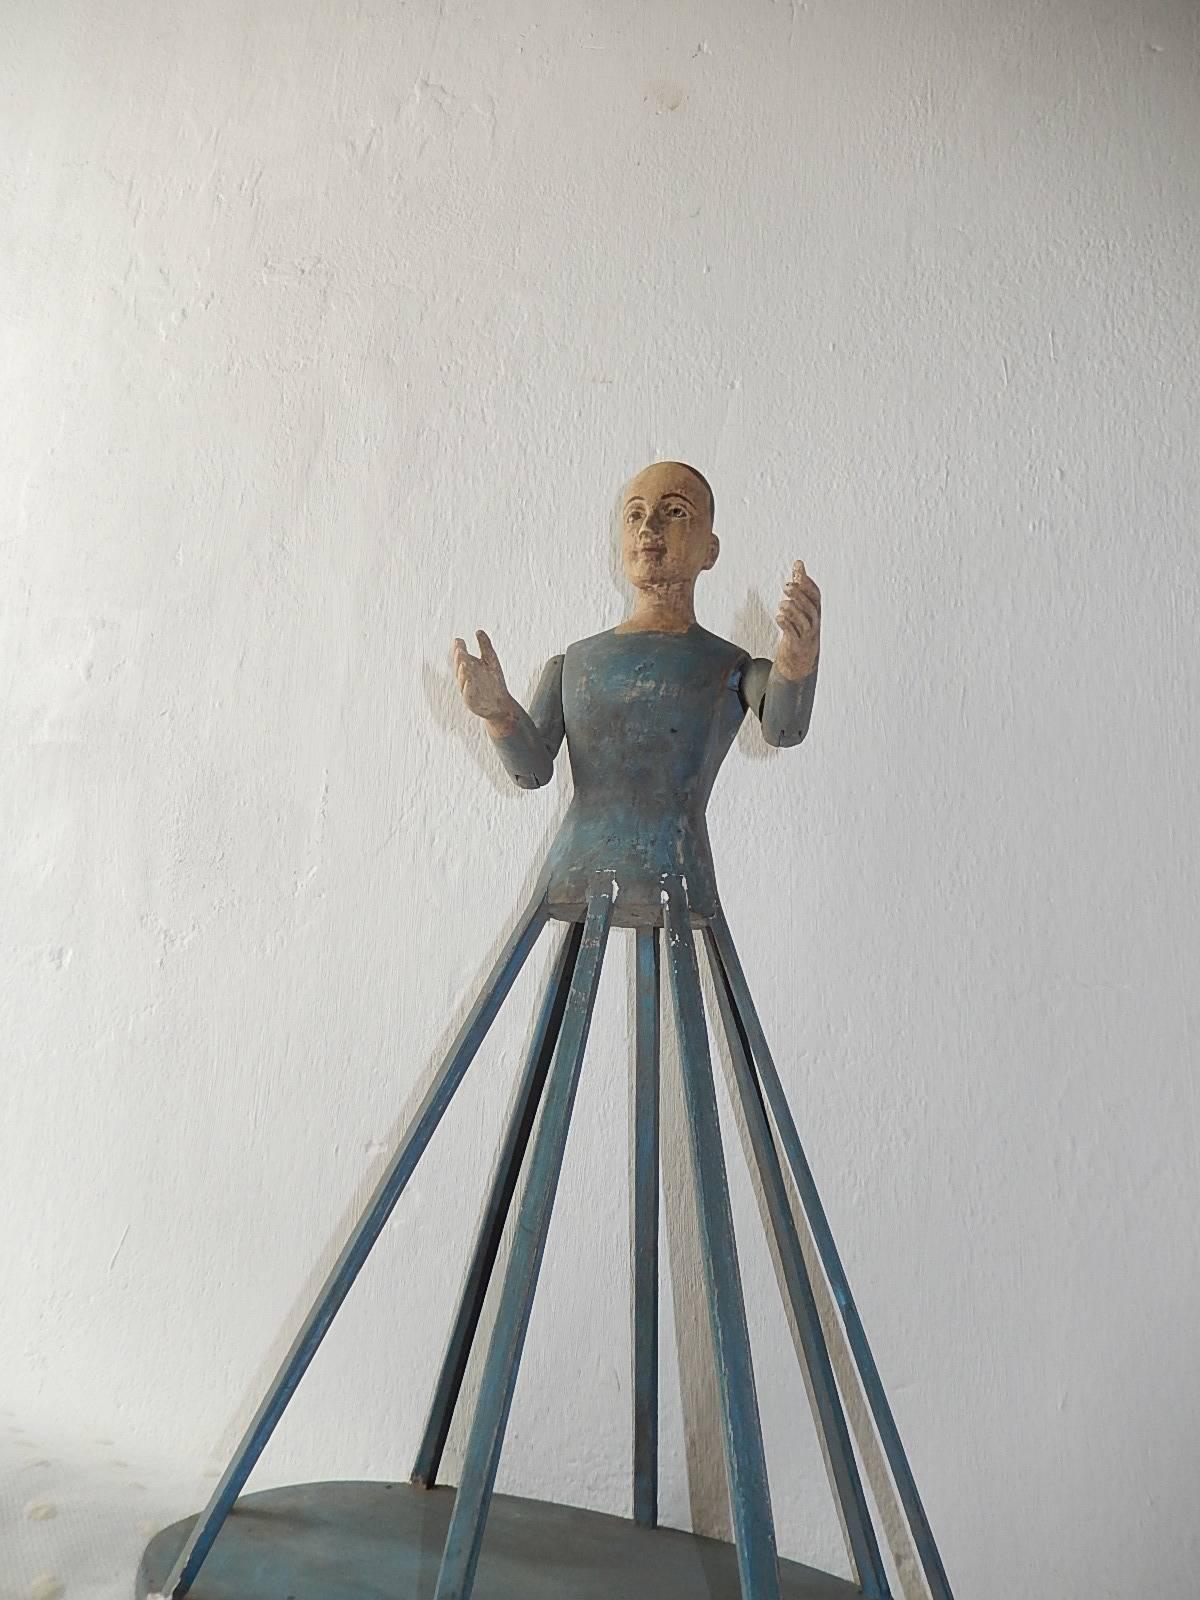 A good mid-19th century Italian wooden bastidor (cage) with inset glass eyes, original articulated arms - jointed at the elbow. Original slatted cage base together with original blue painted surface. Incredible patina, circa 1850. Free priority